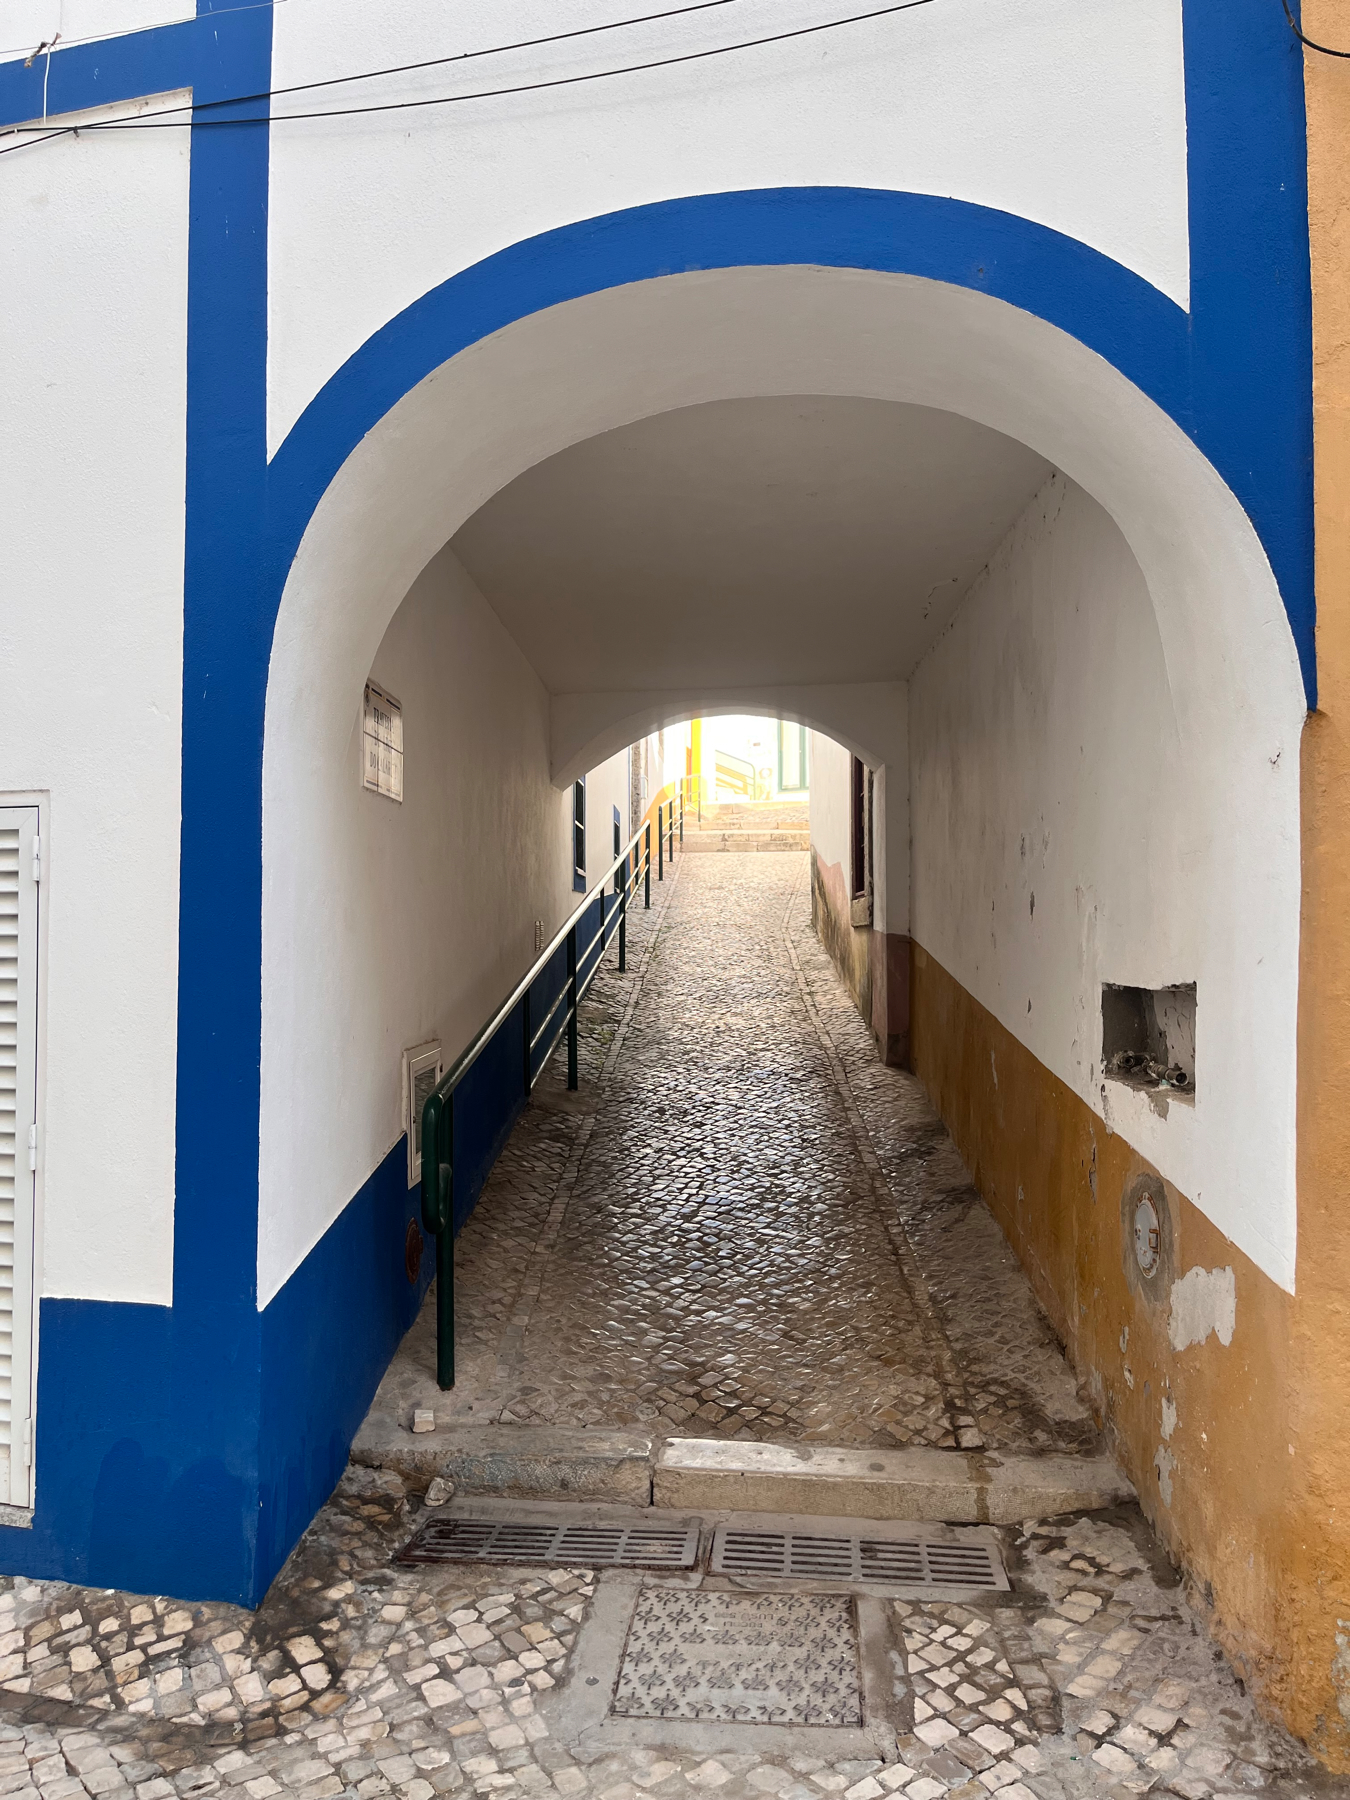 Archway, painted blue trim with white as the main color, on a town footpath